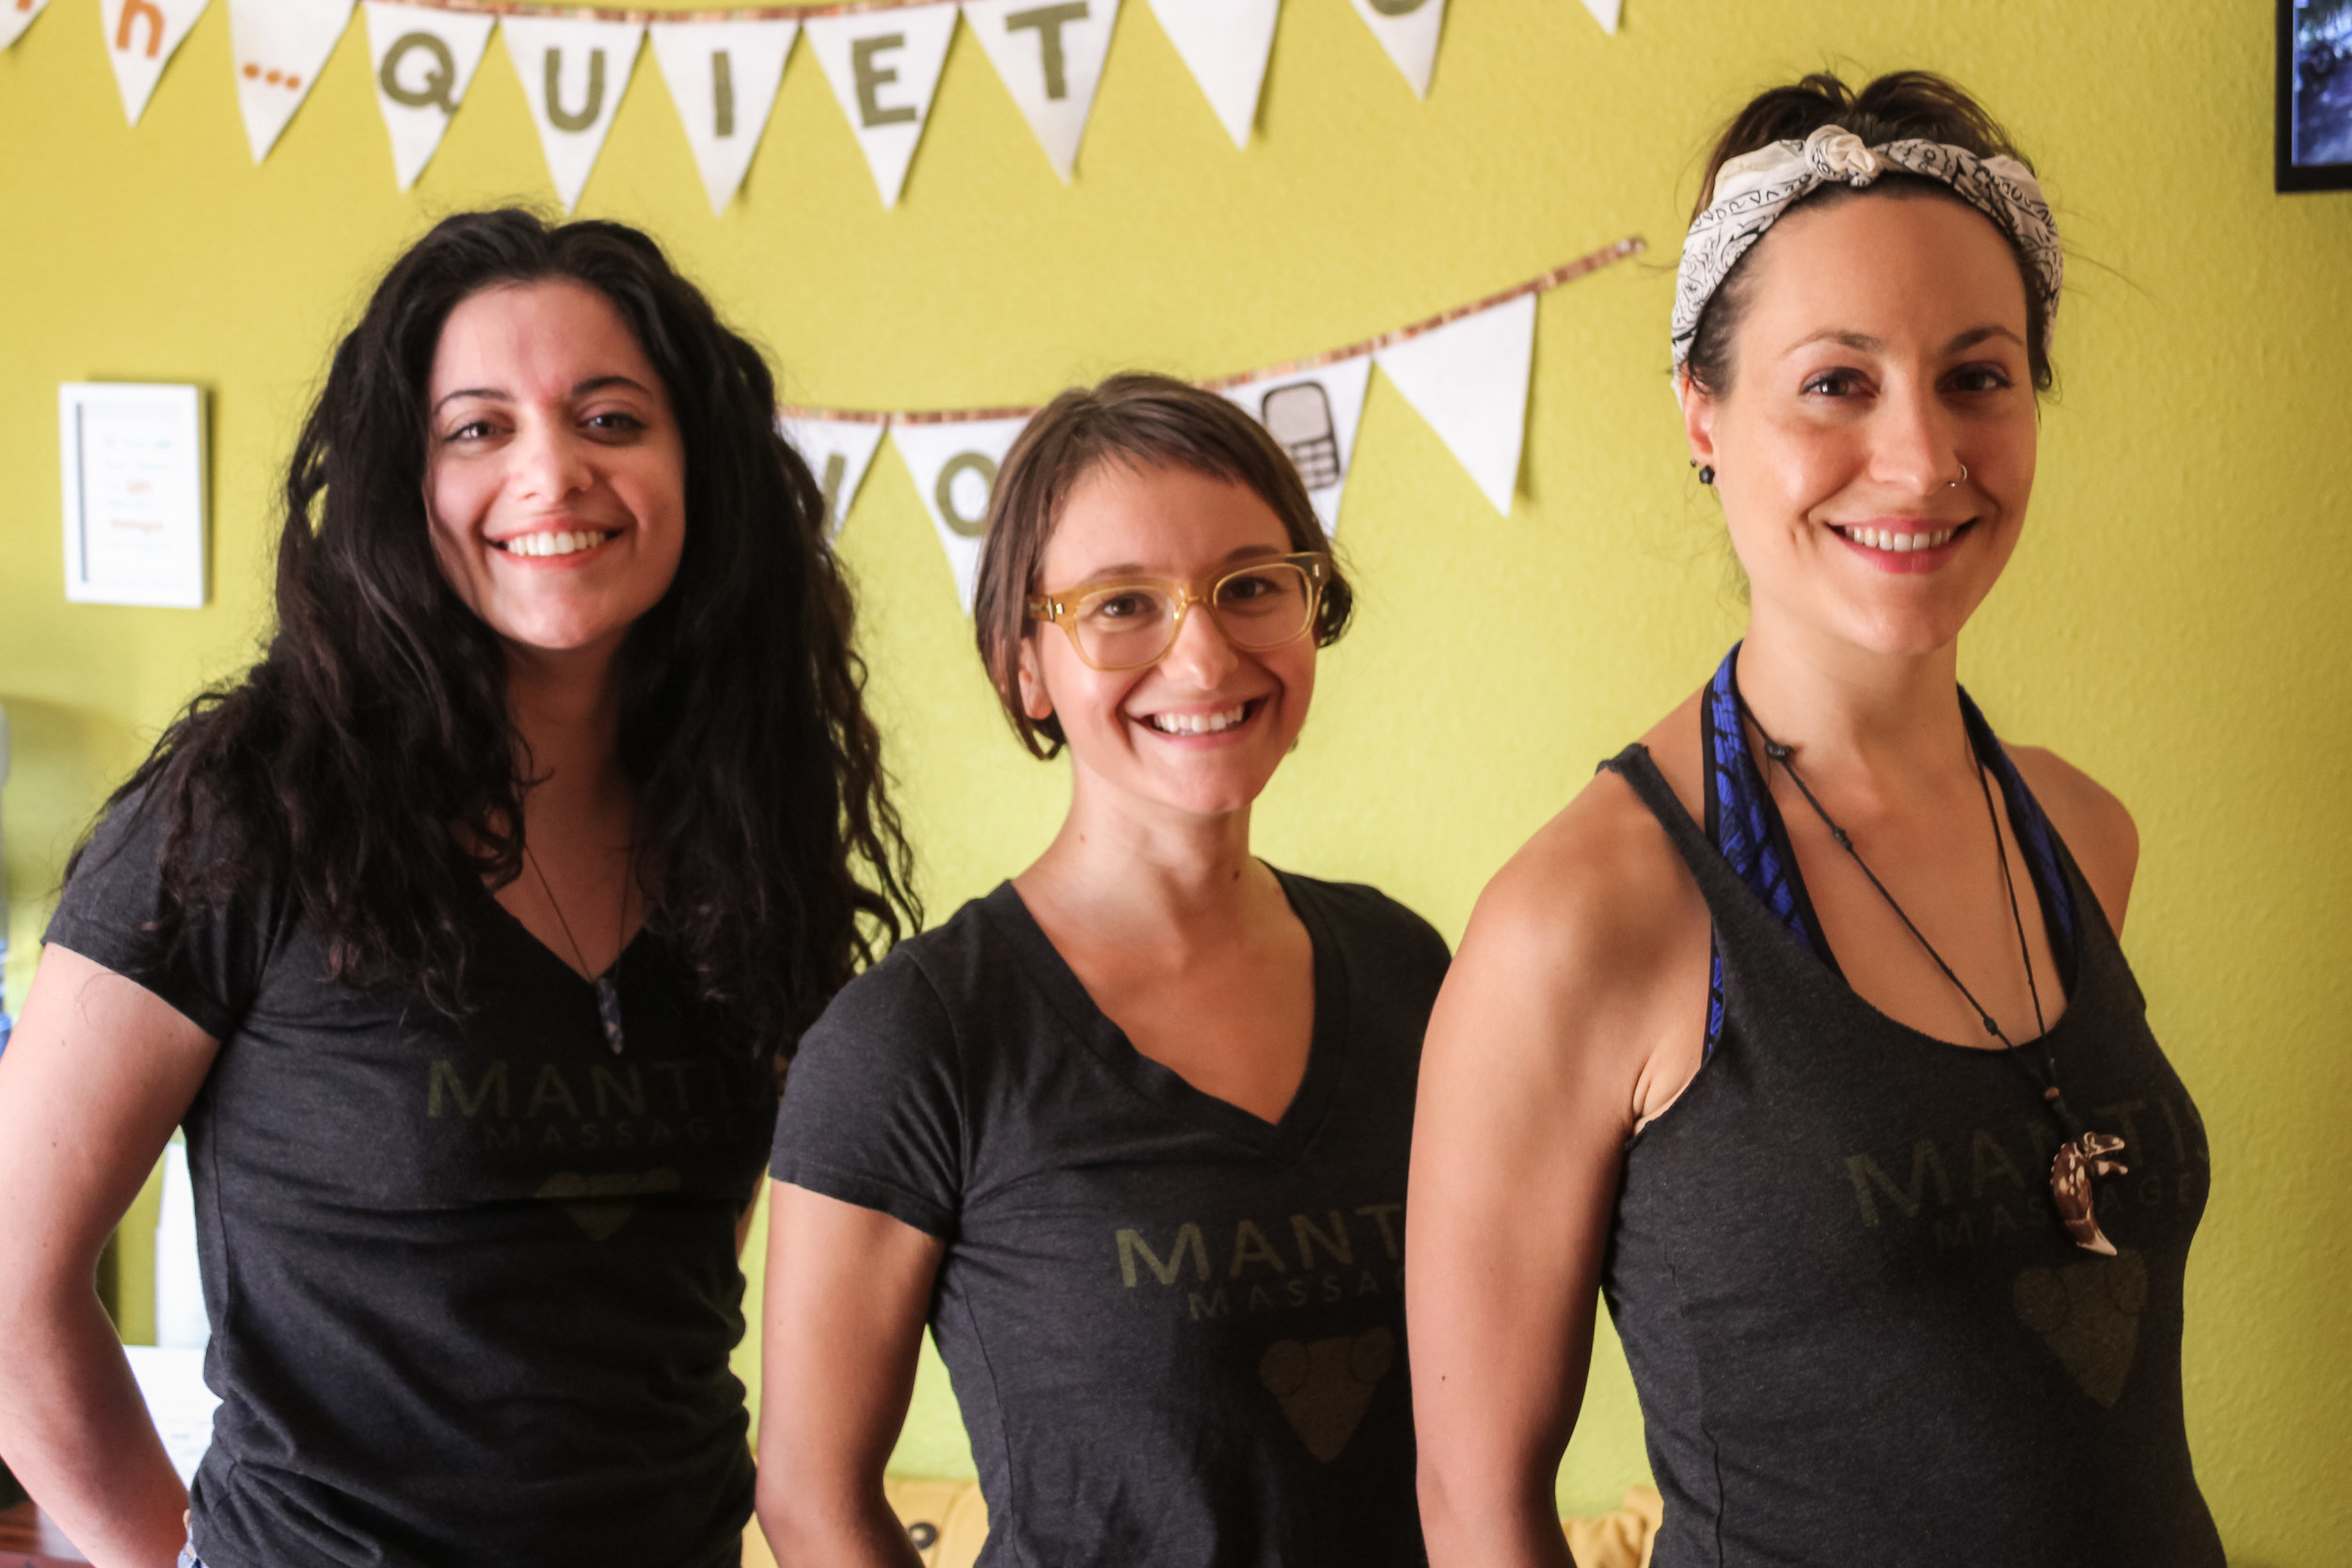  Image features three members of the dedicated team at Mantis Massage in Austin, Texas. With a shared passion for wellness and healing, our skilled therapists bring expertise and compassion to every session. From soothing Swedish massages to targeted